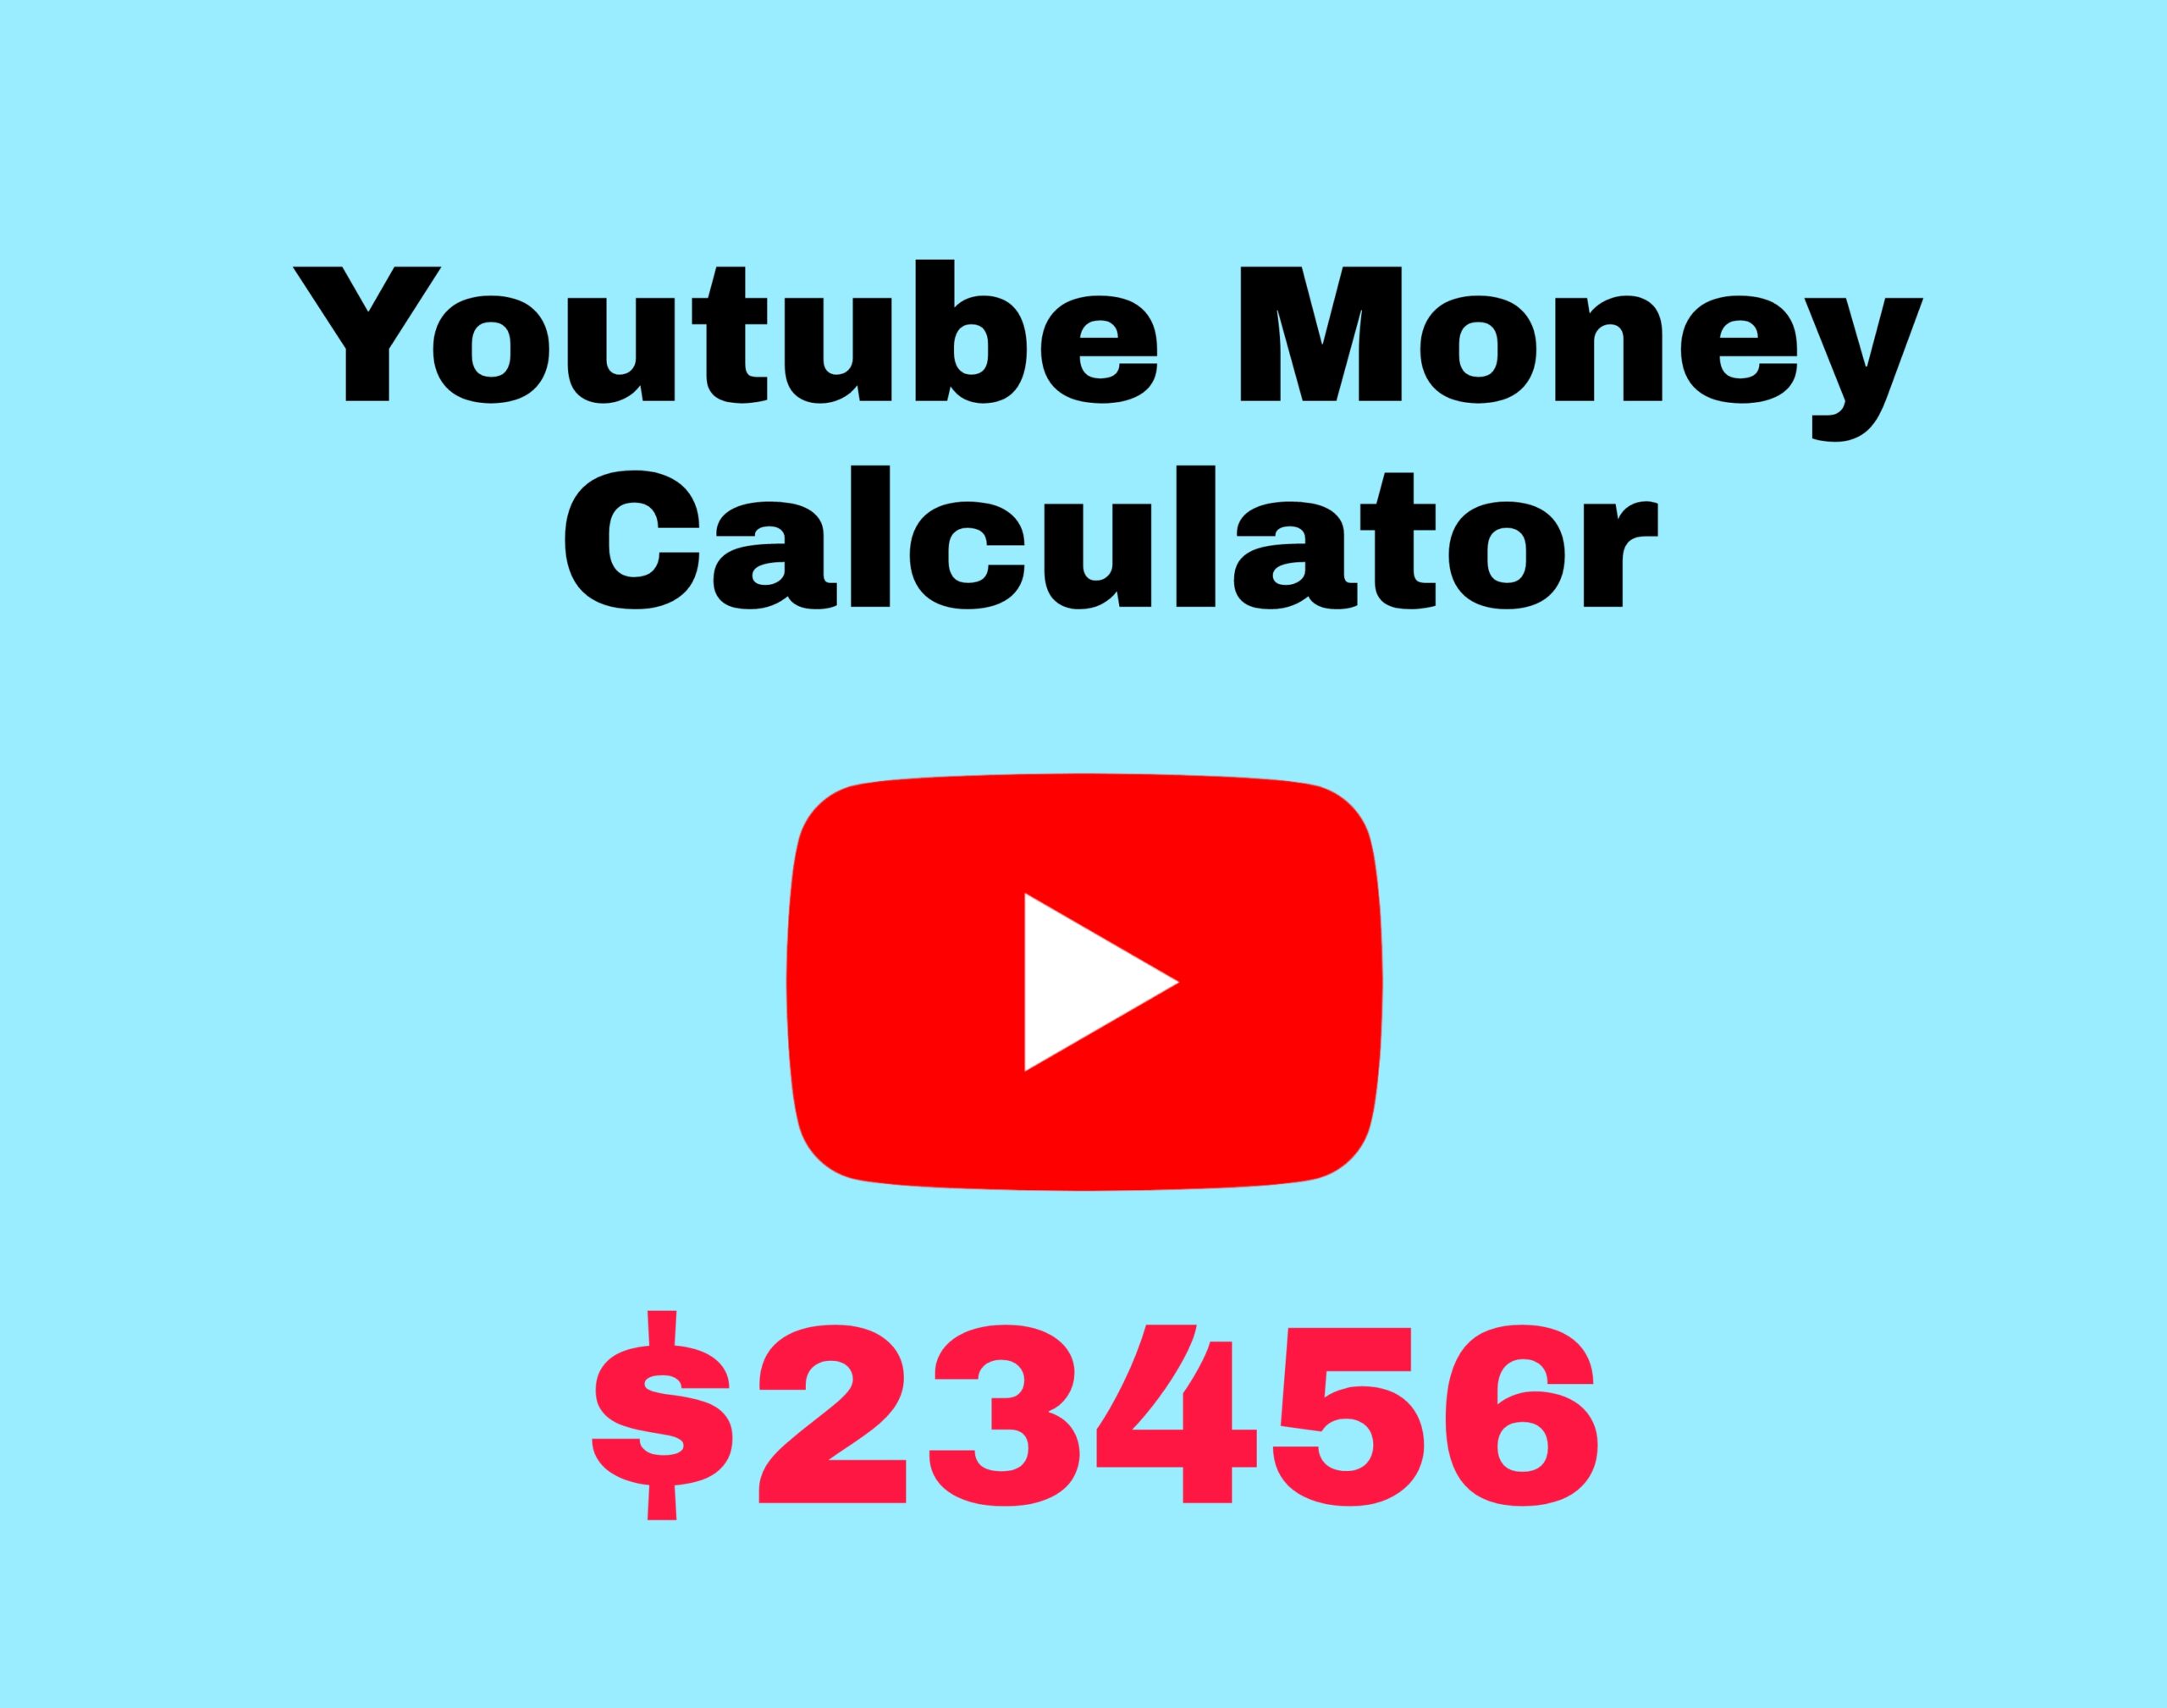 Youtube Money Calculator: How Much You Can Make With Your Videos